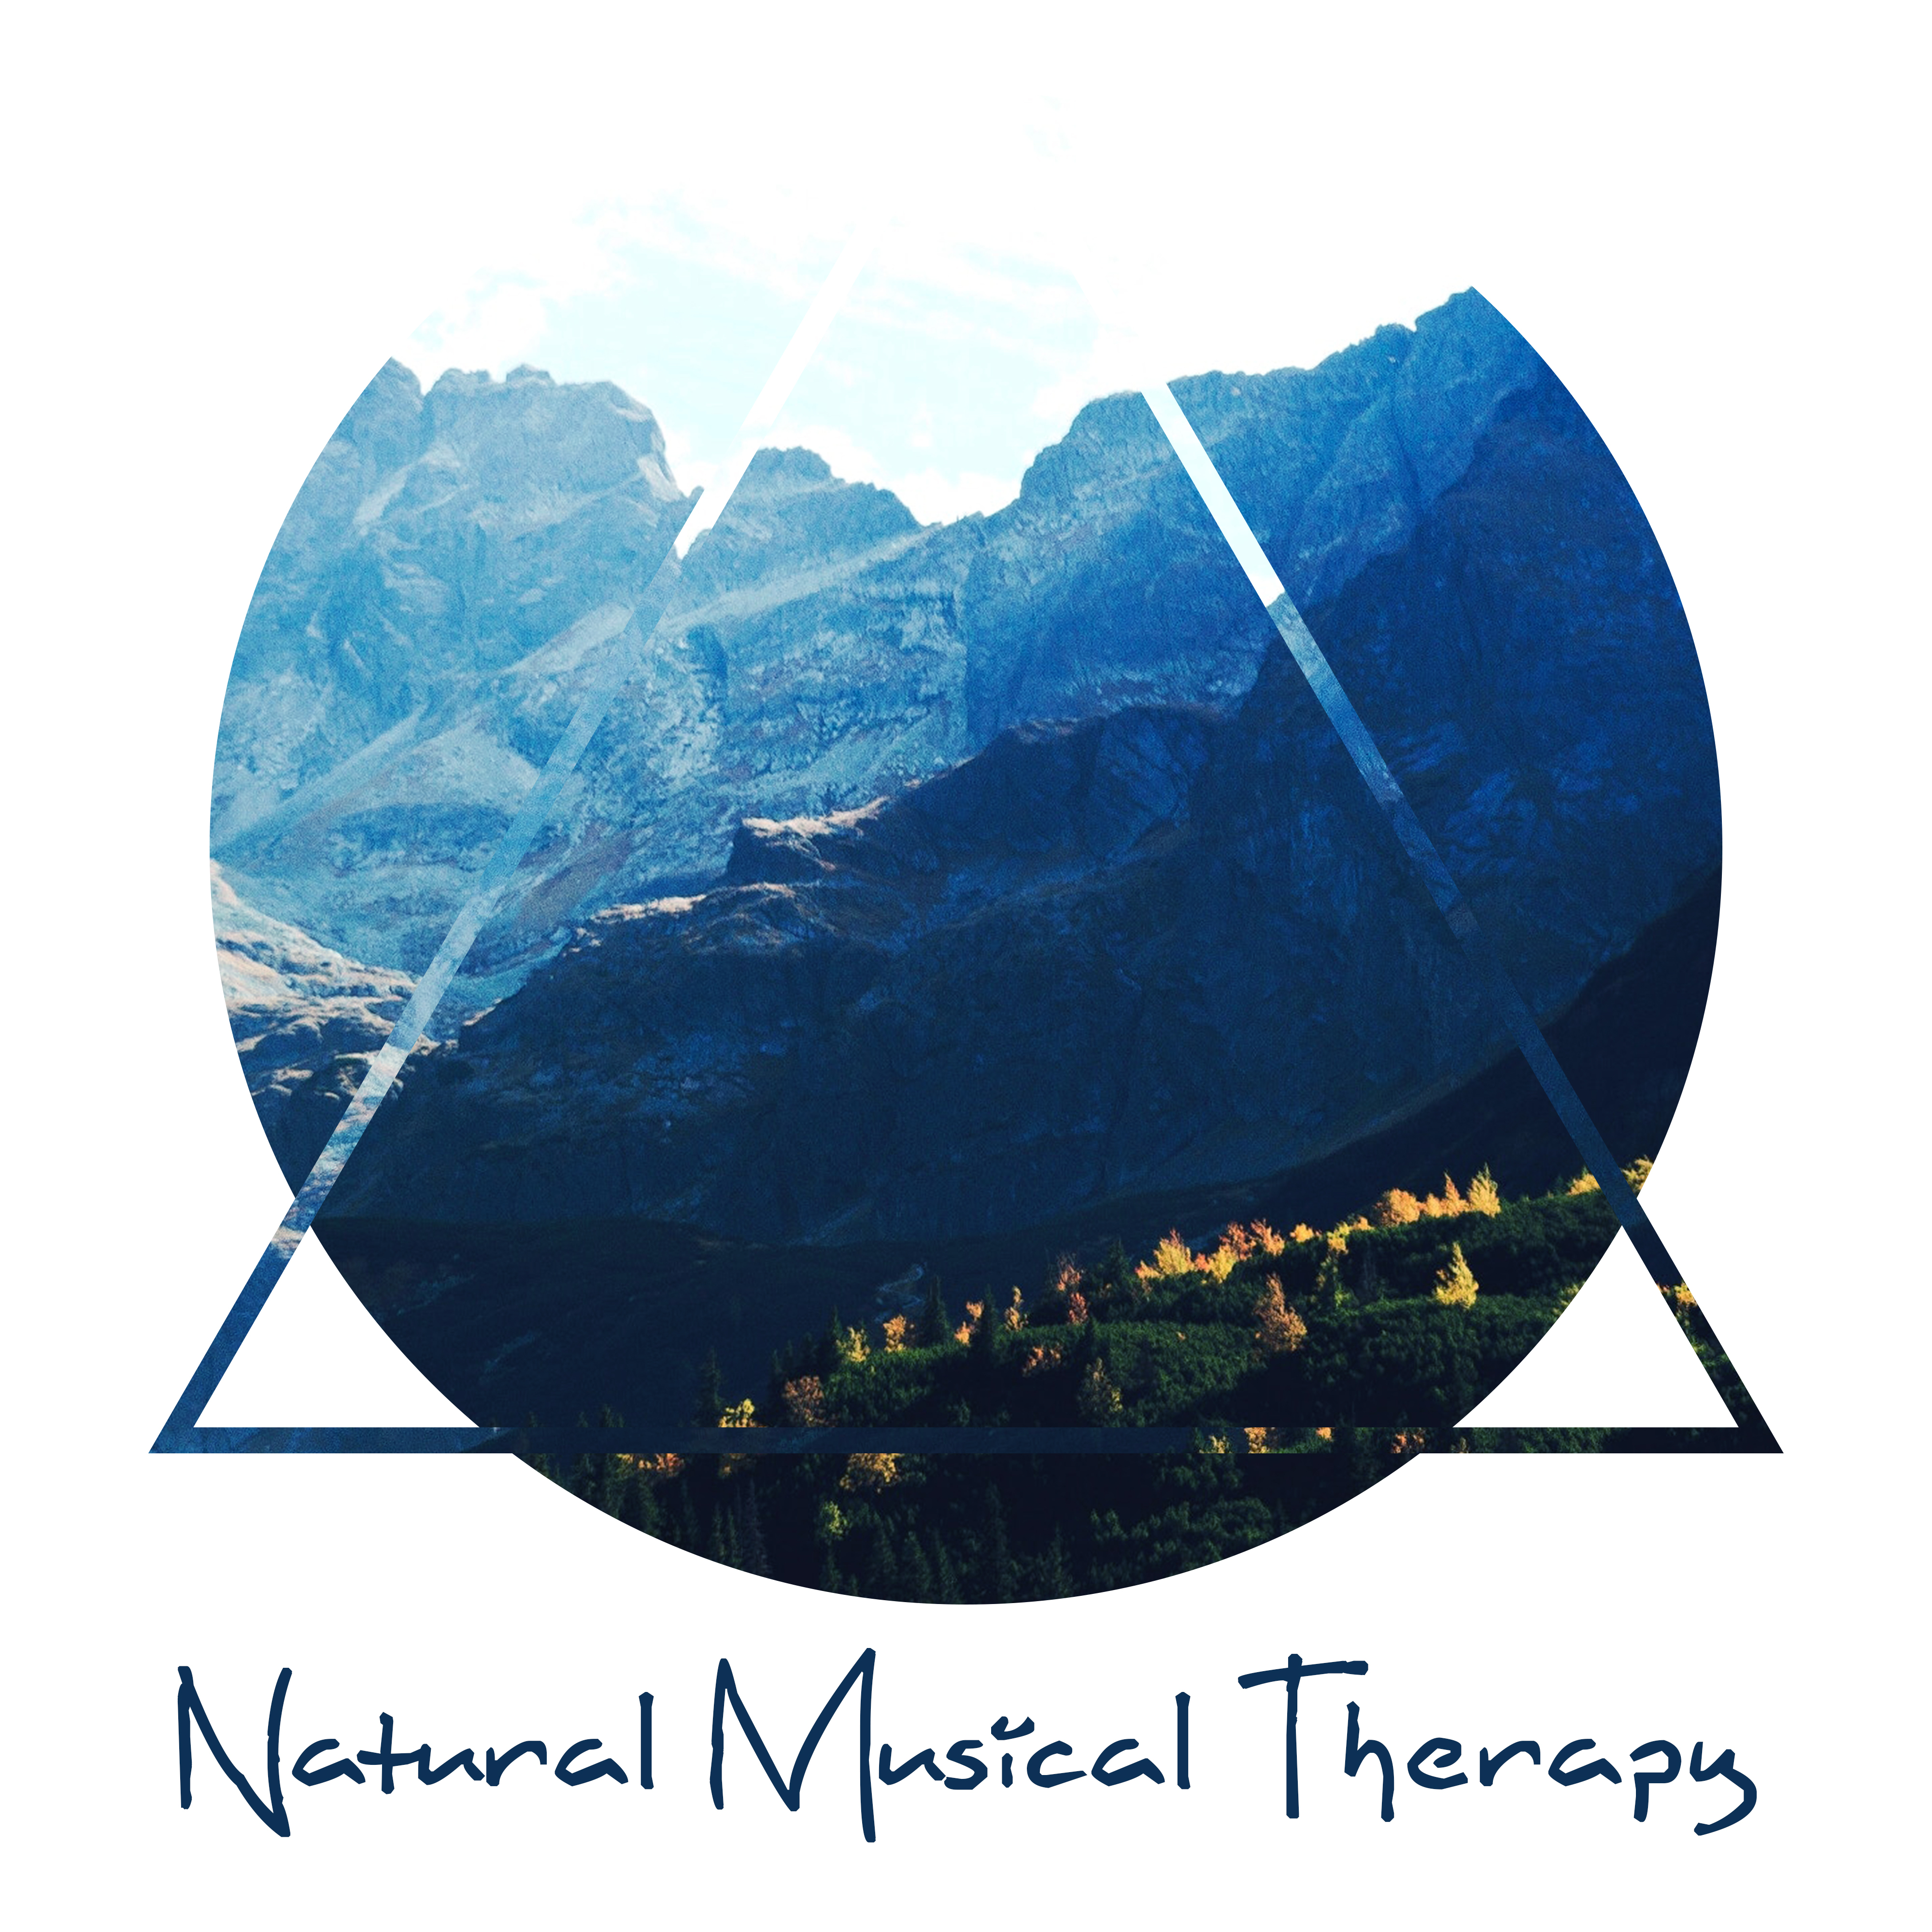 Natural Musical Therapy